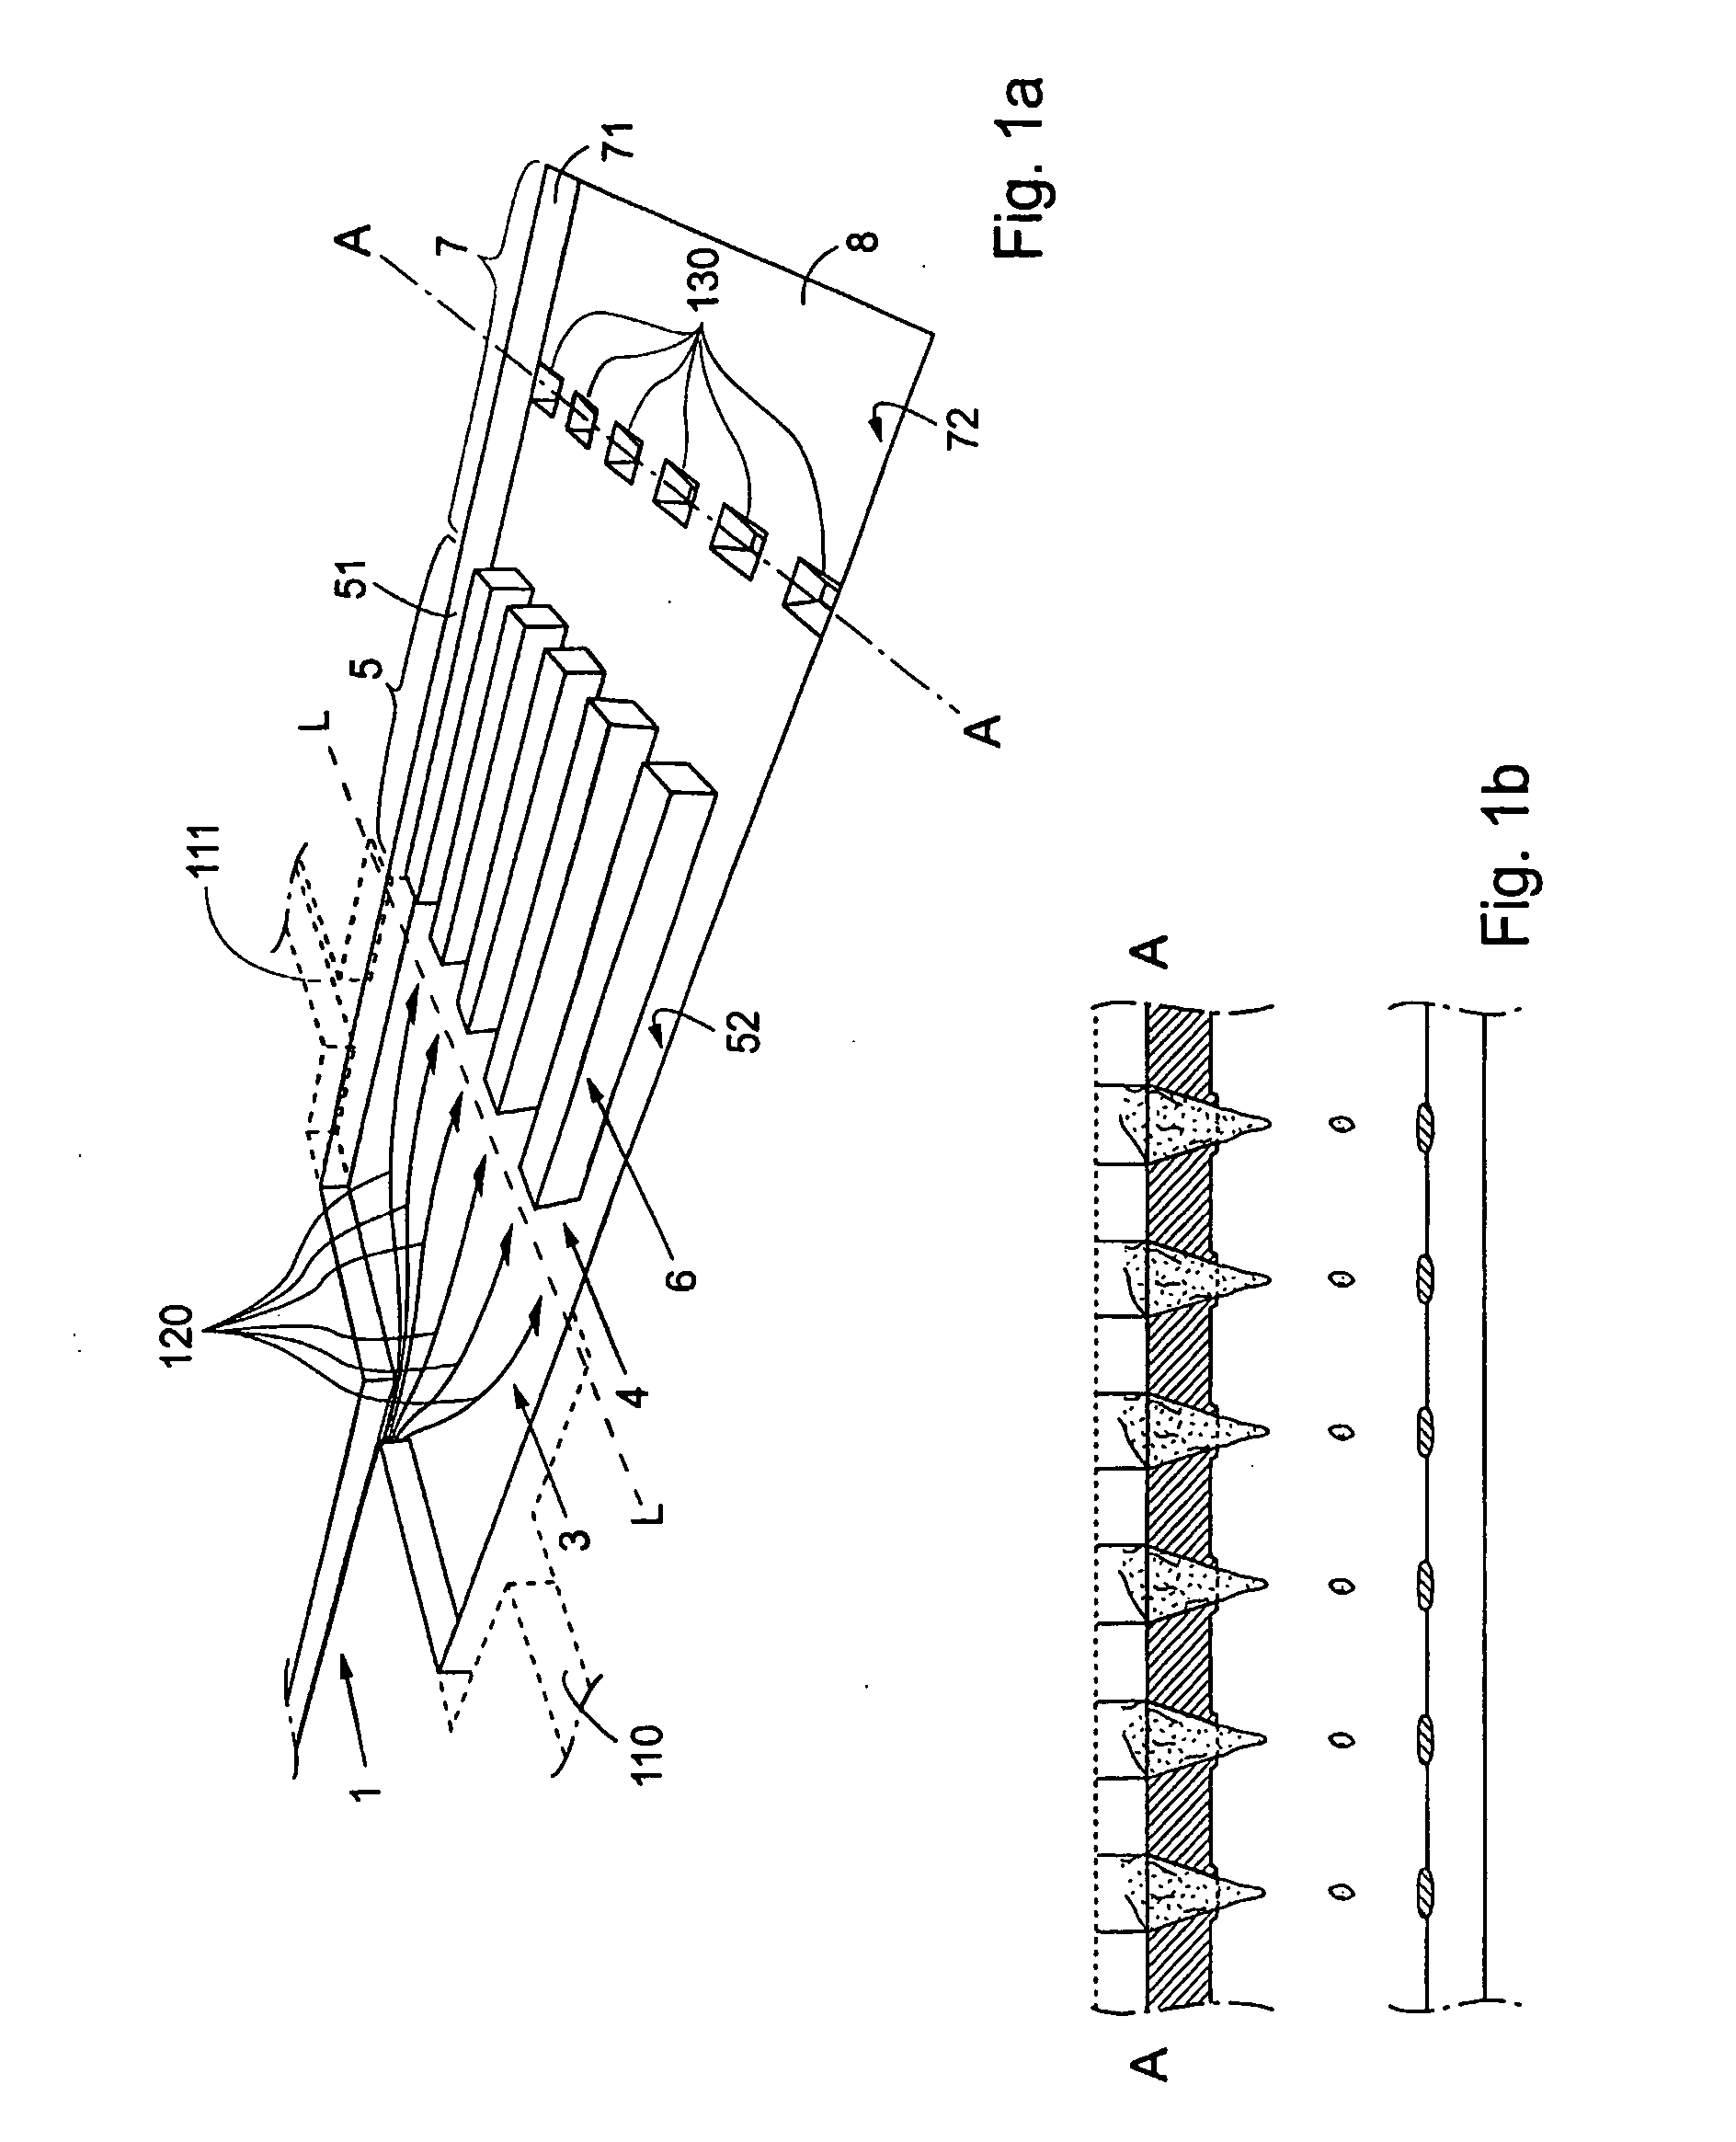 Device and method useable for integrated sequential separation and enrichment of proteins